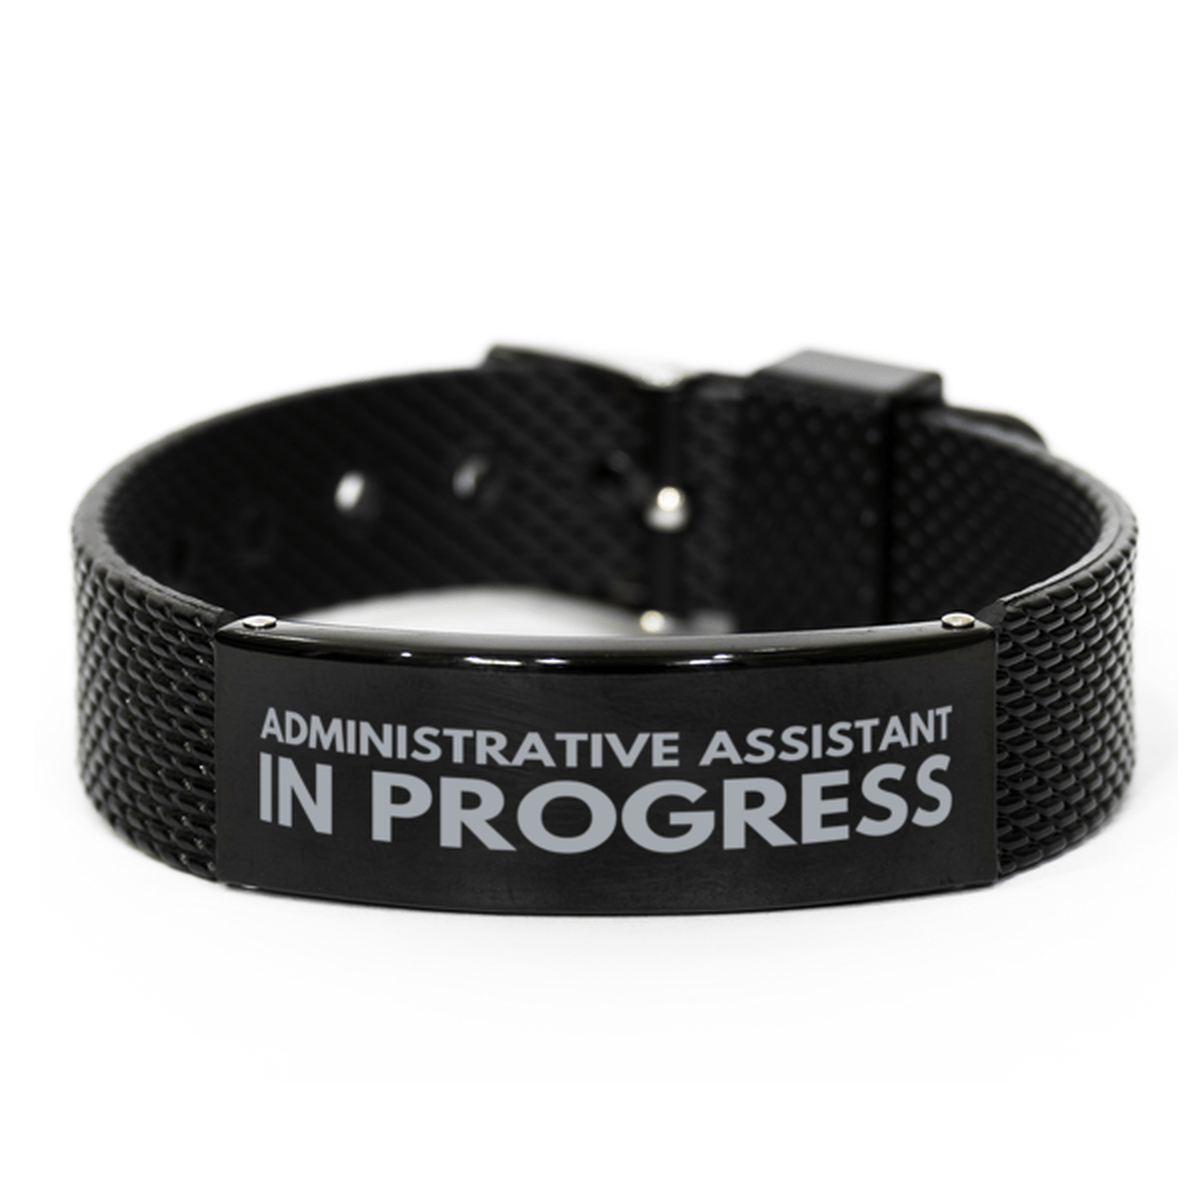 Inspirational Administrative Assistant Black Shark Mesh Bracelet, Administrative Assistant In Progress, Best Graduation Gifts for Students